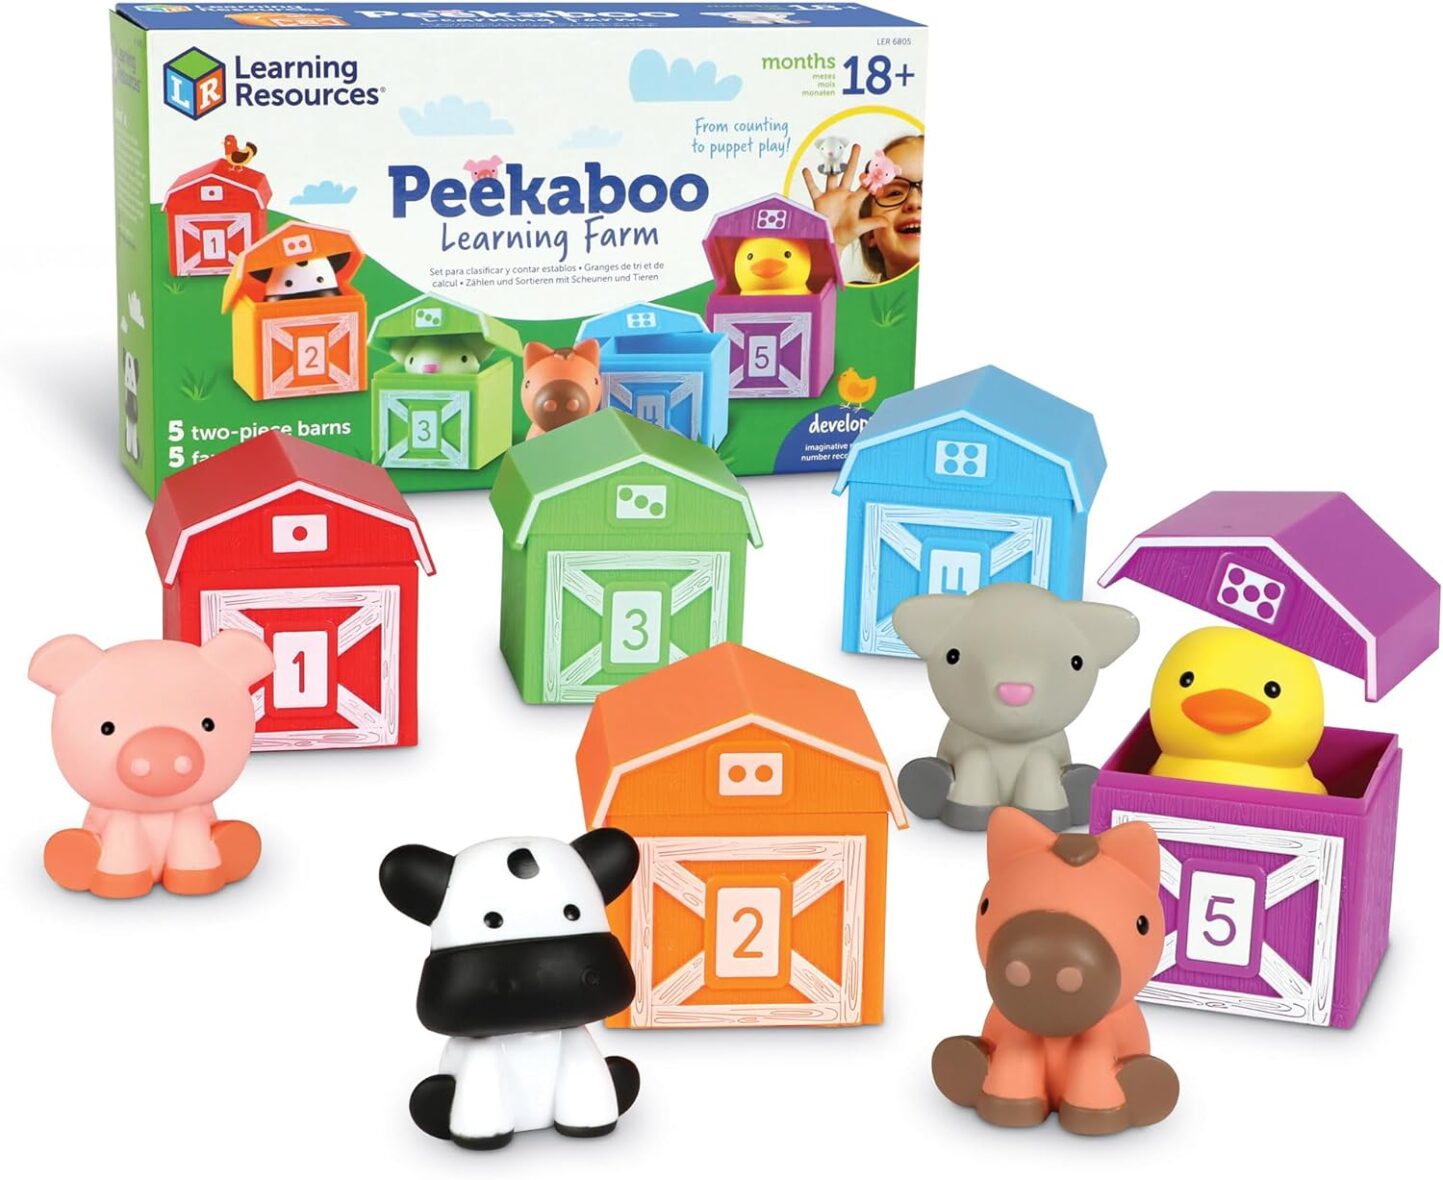 Learning Resources Peekaboo Learning Farm – 10 Pieces, Ages 18+ months Toddler Learning Toys, Counting and Sorting Toys, Farm Animals Toys Ms Rachel toy